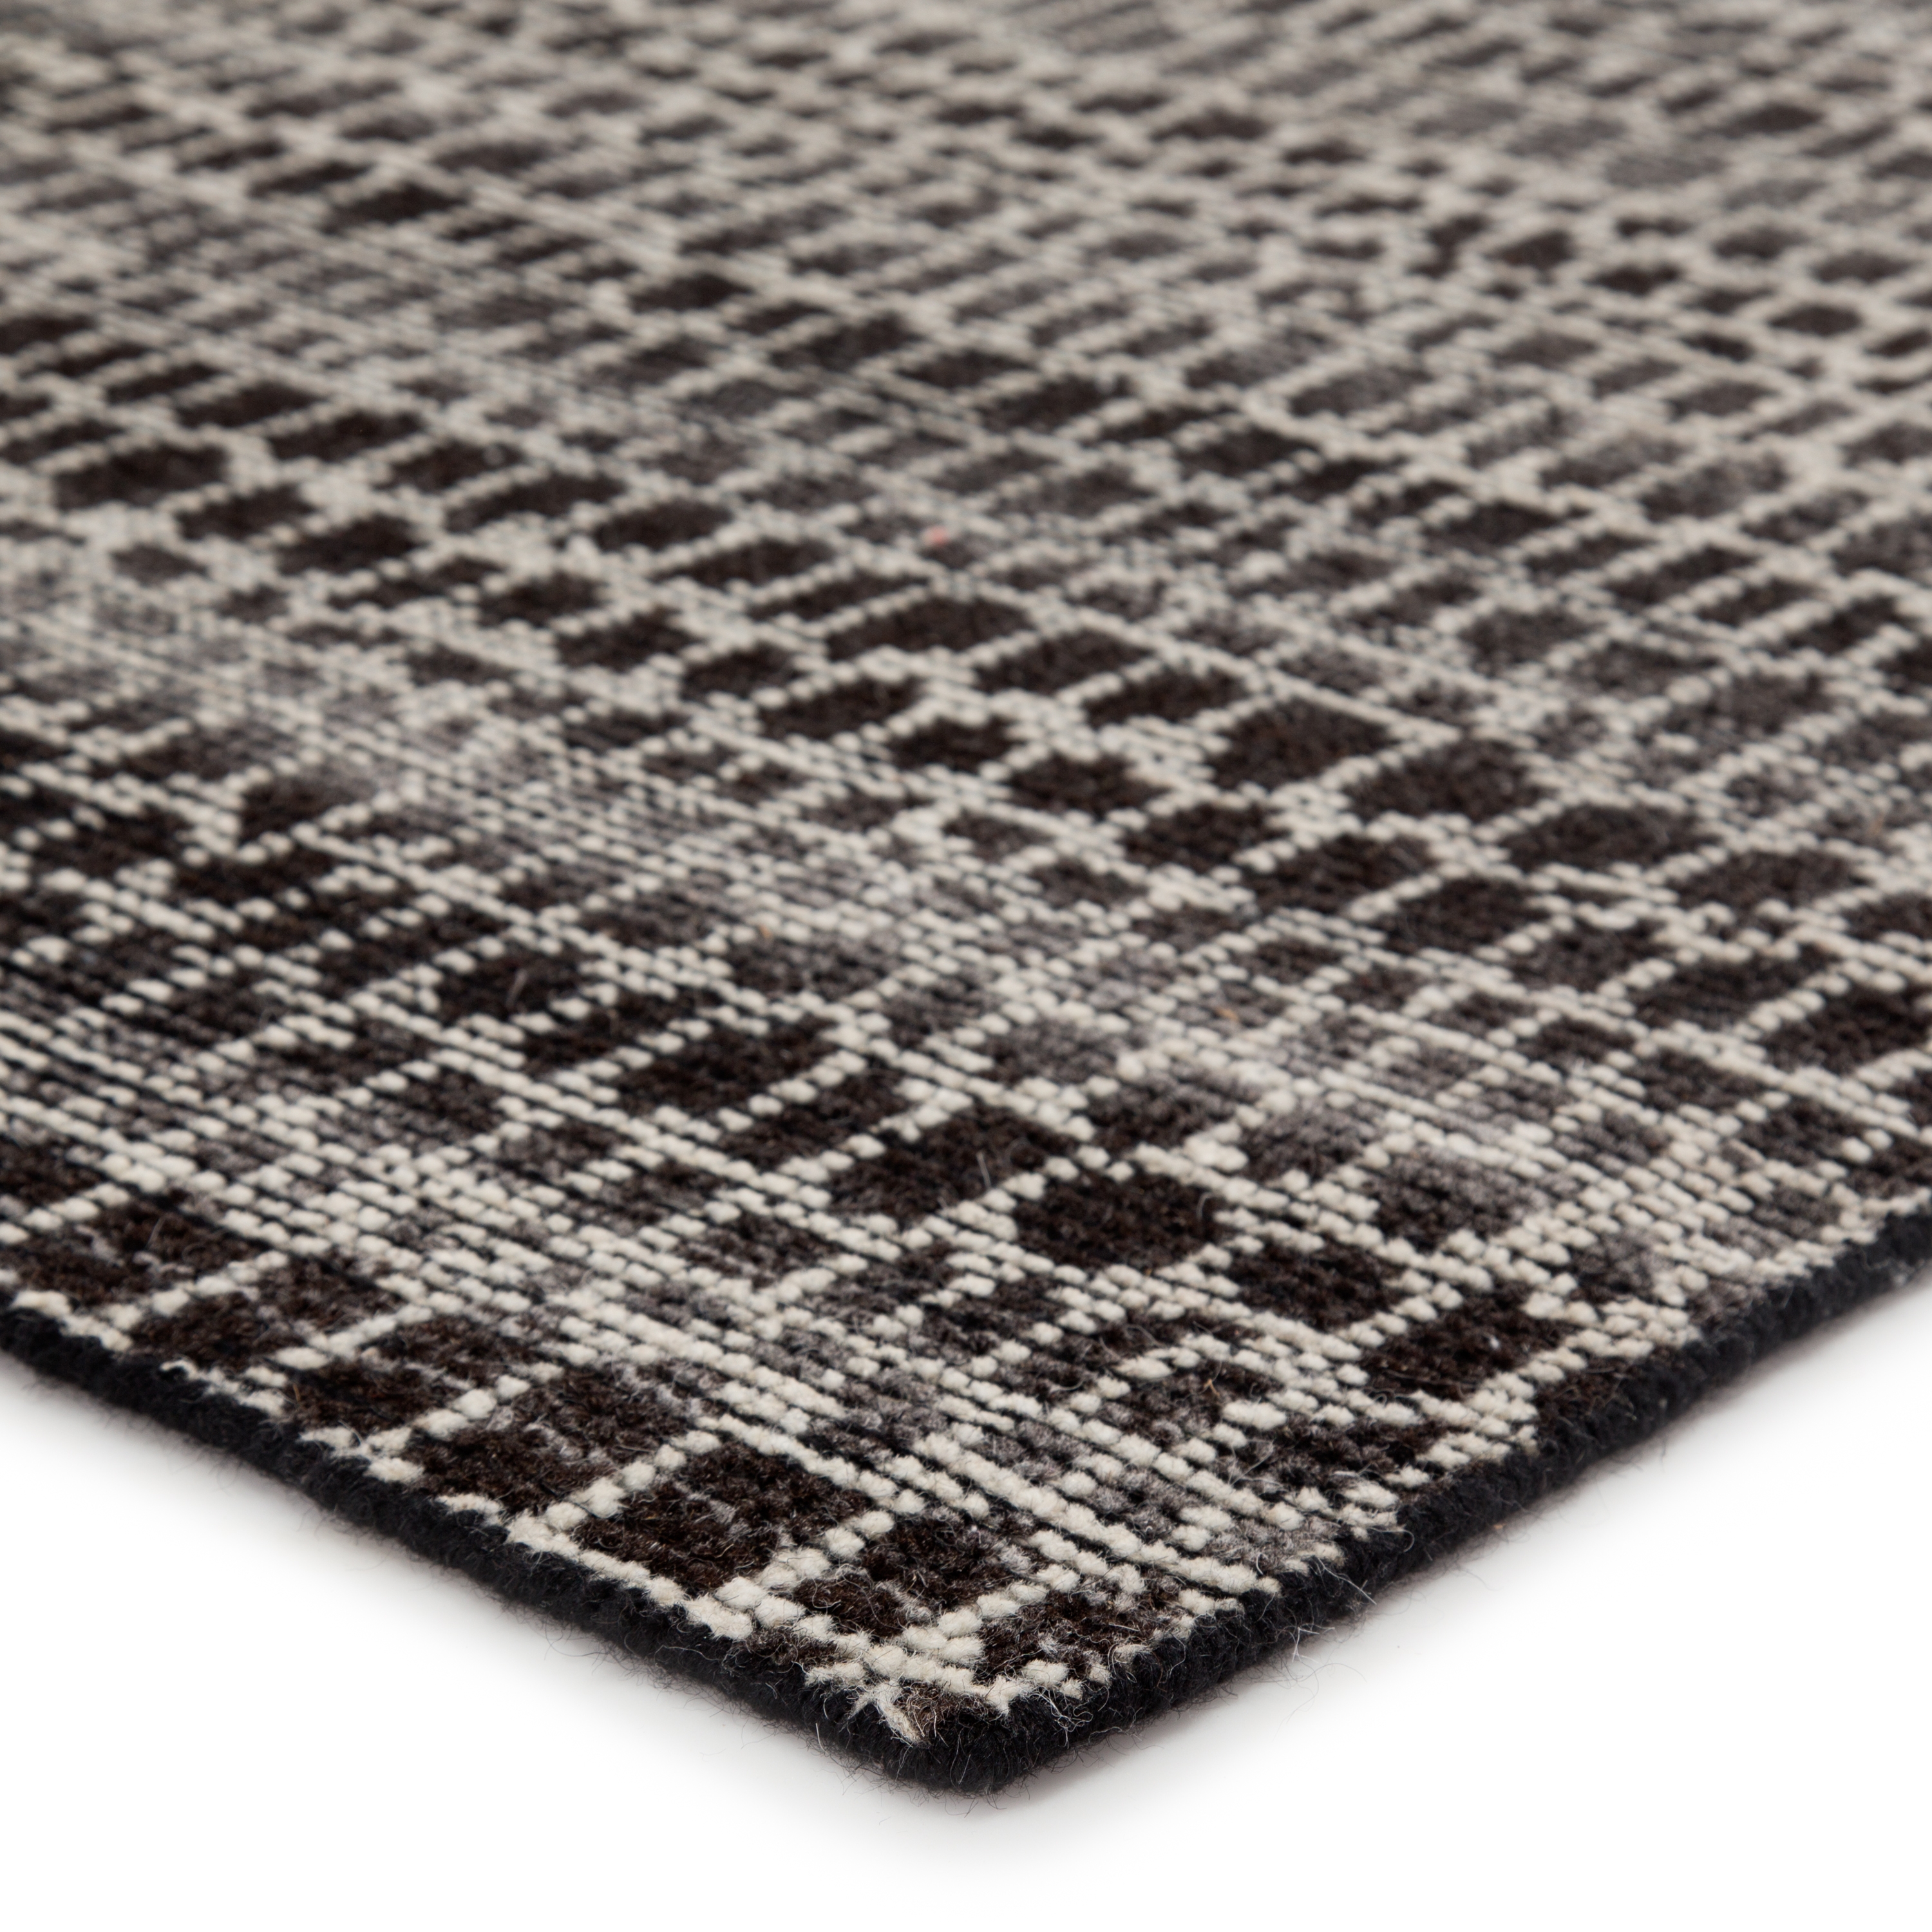 Pollack by Kinetic Hand-knotted Trellis Black/ Ivory Runner Rug (3'X10') - Image 1